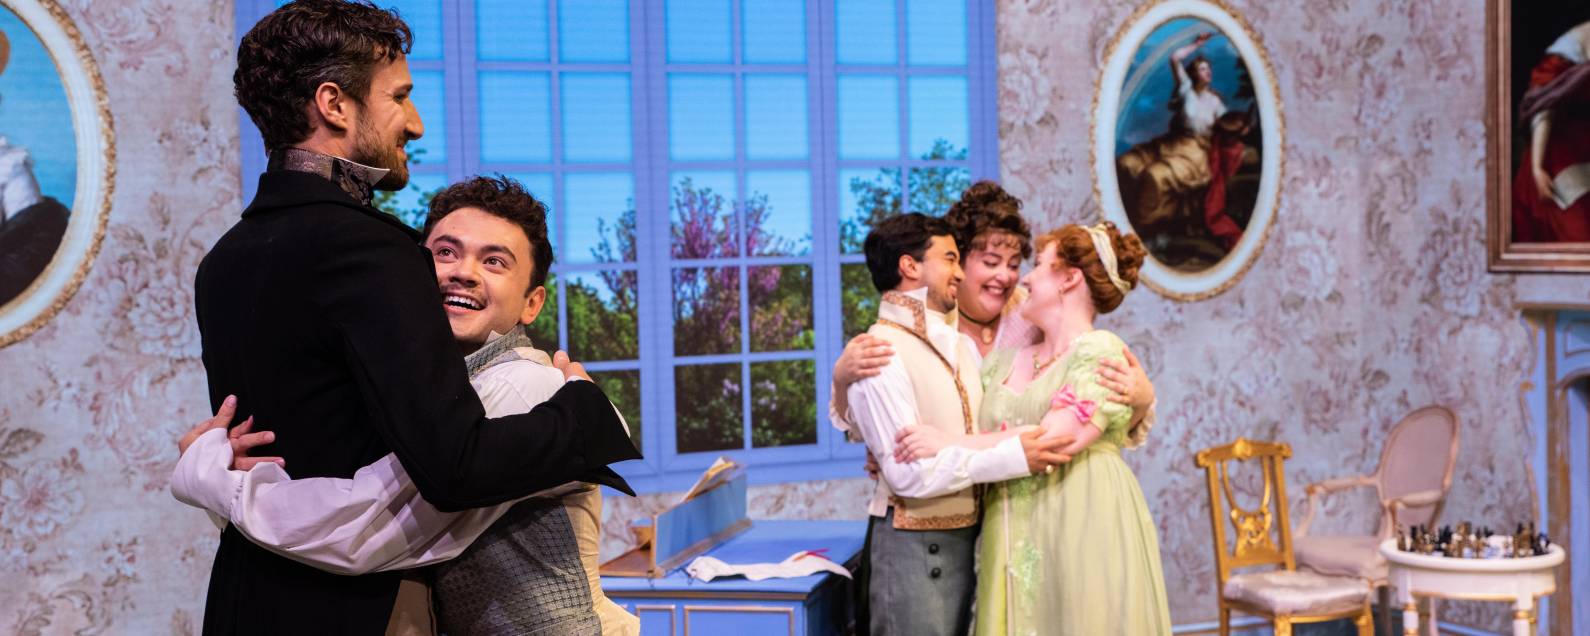 Characters share comically exaggerated group embraces in a scene from The Barber of Seville.